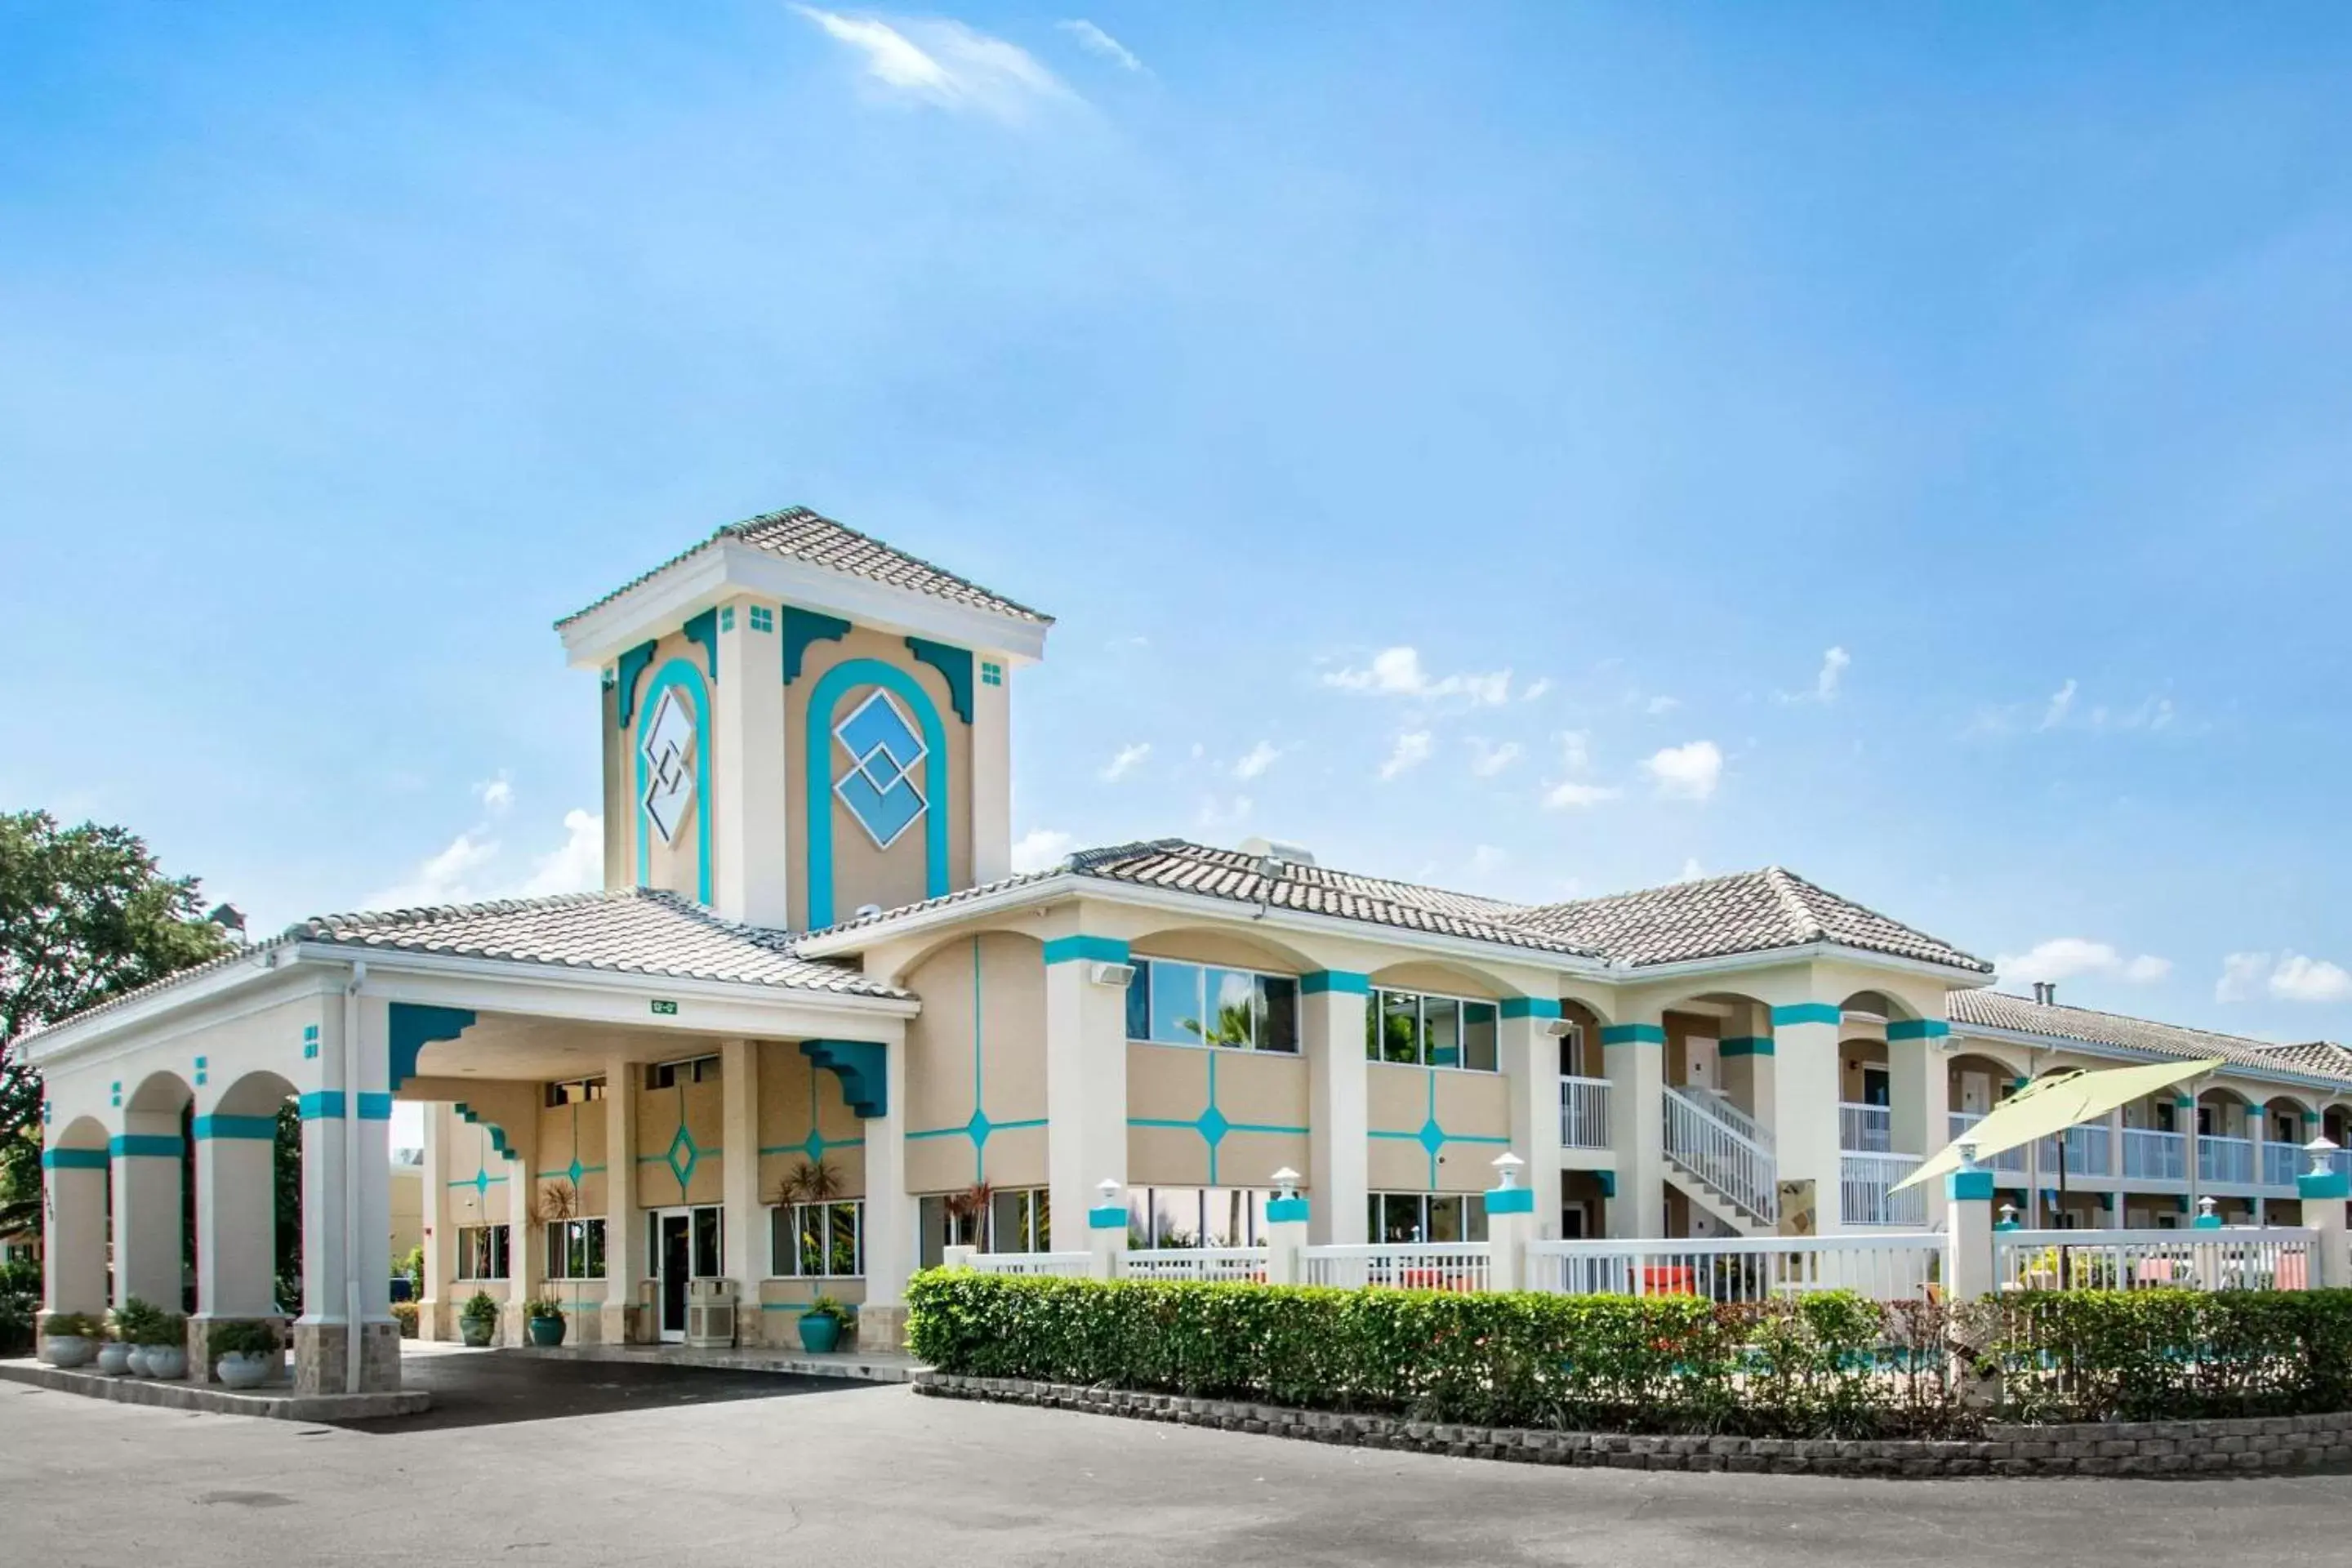 Property building in Quality Inn Clermont West Kissimmee